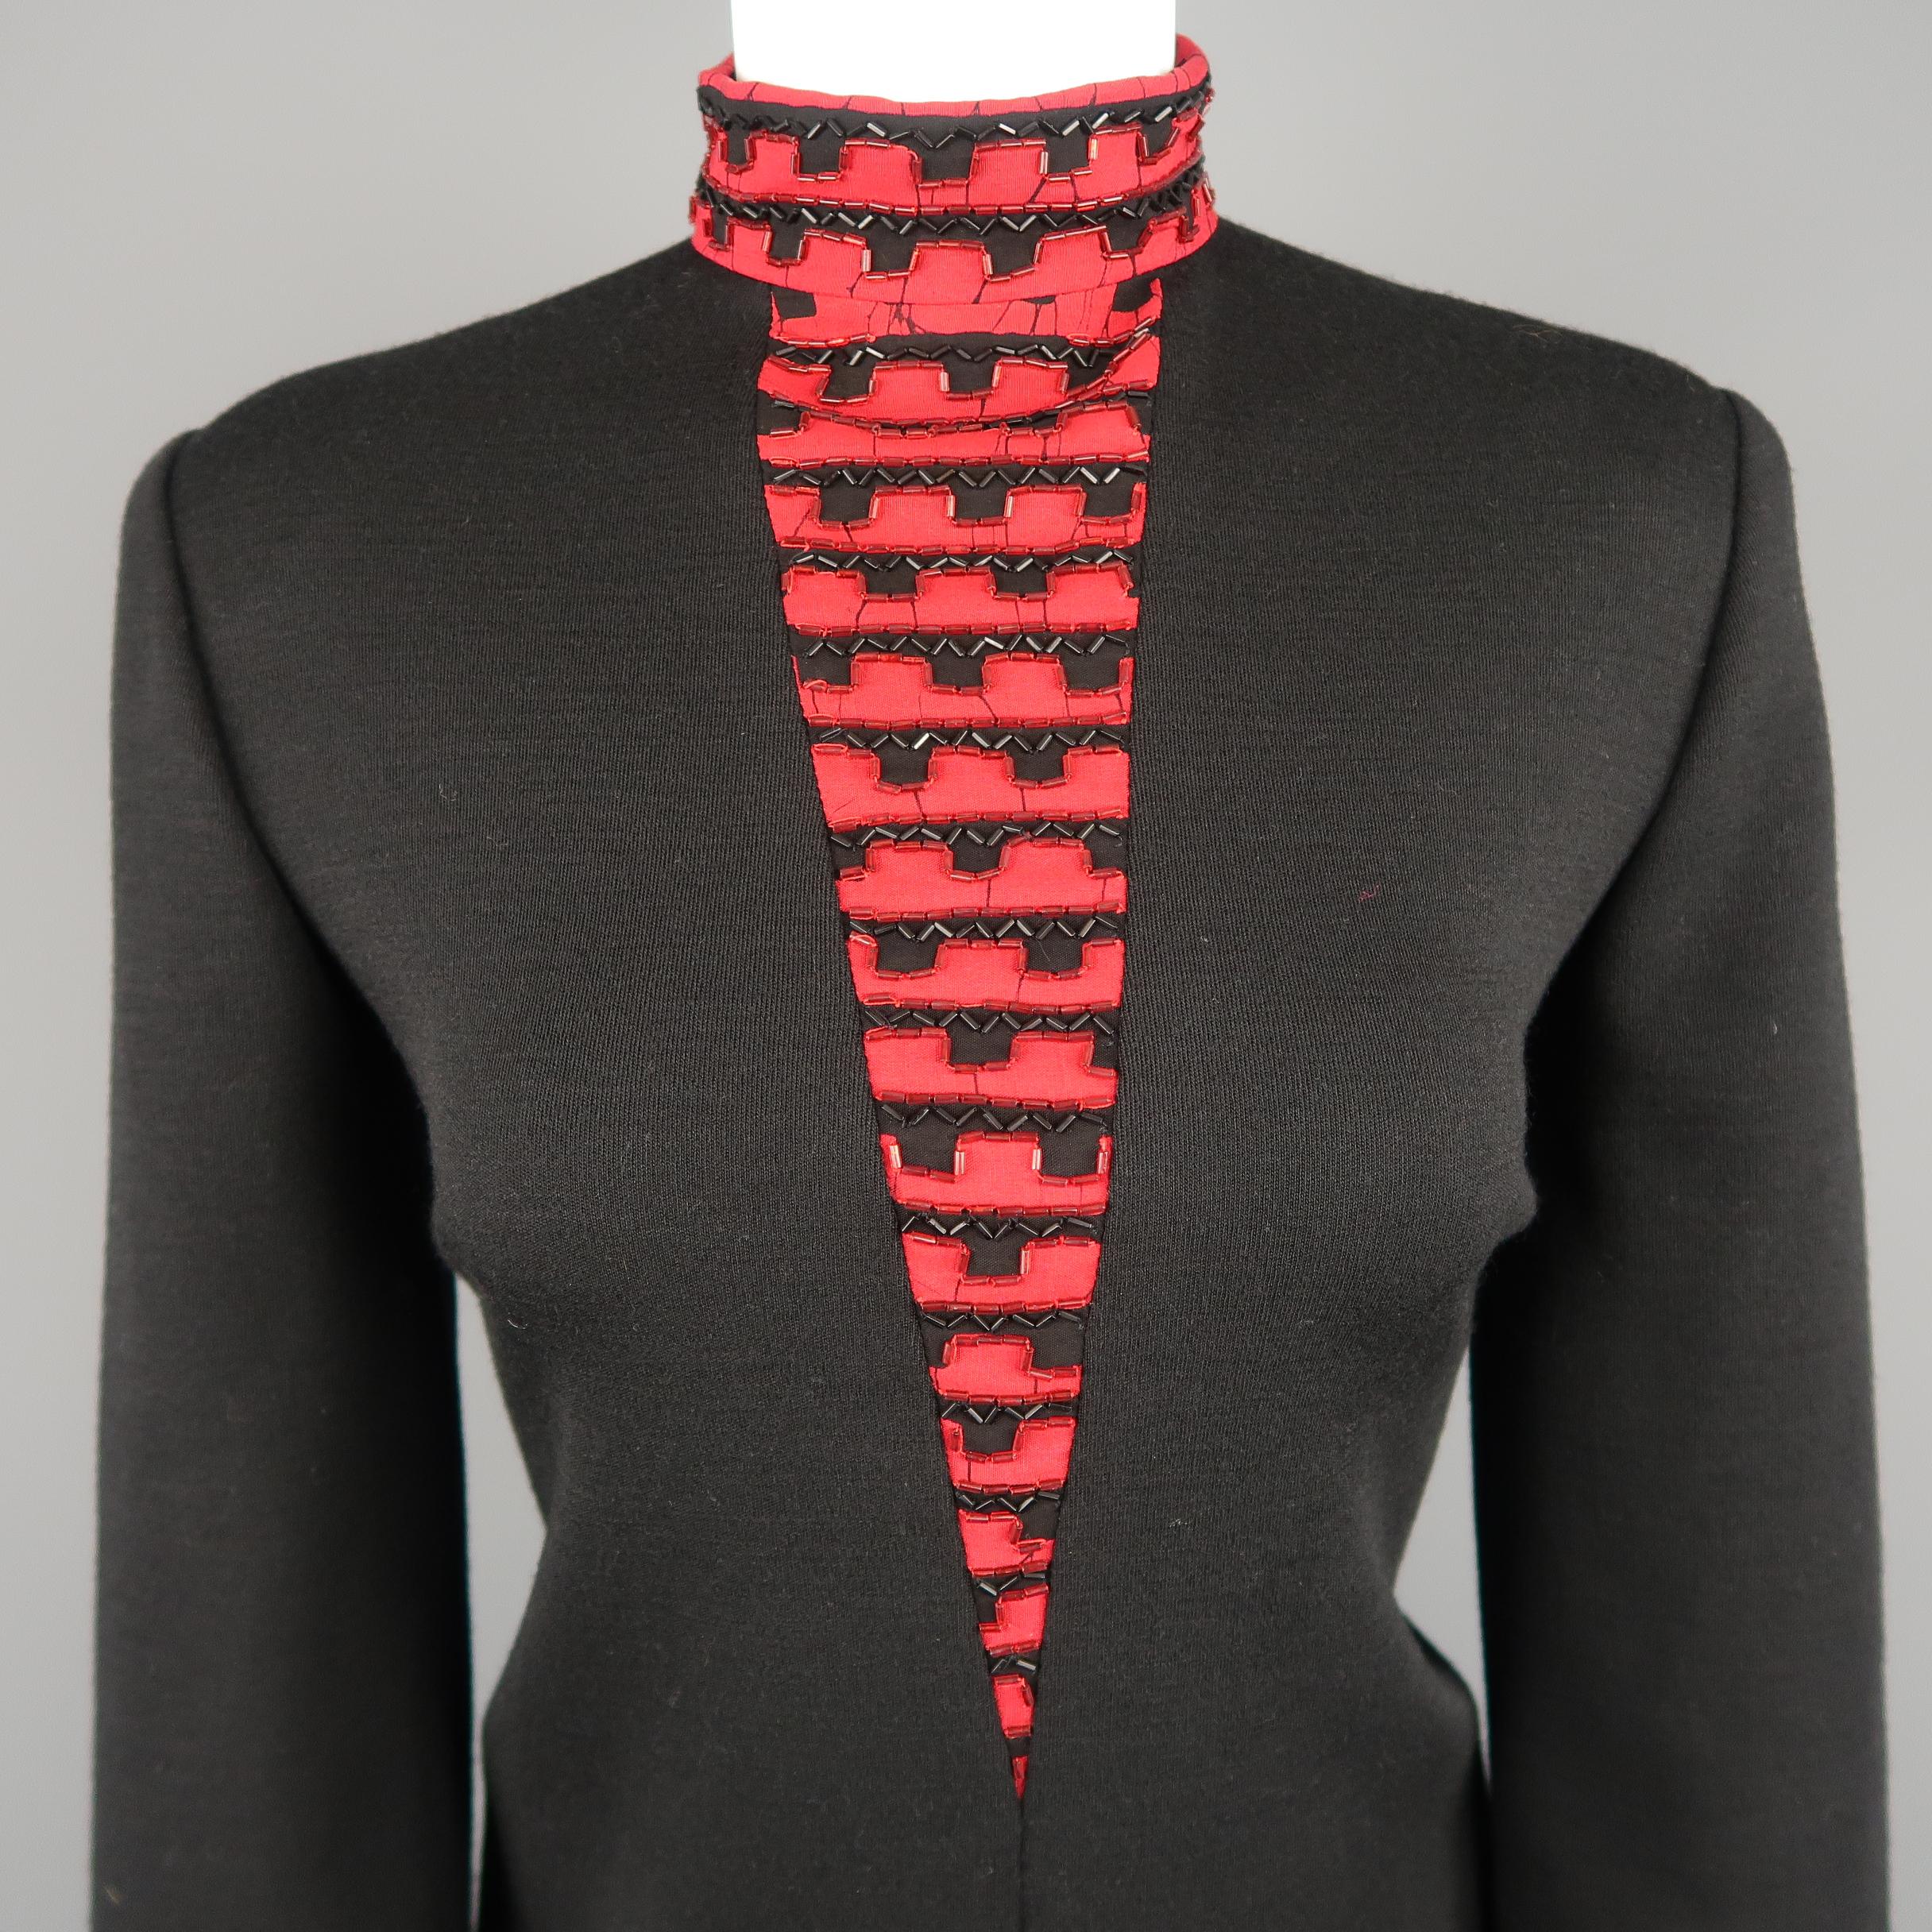 Vintage 1980's BOB MACKIE dress comes in black jersey knit with a shift silhouette, red beaded stand up collar with V panel and layered sleeves with red cuffs. Made in USA.
 
Good Pre-Owned Condition.
Marked: (no size)
 
Measurements:
 
Shoulder: 16